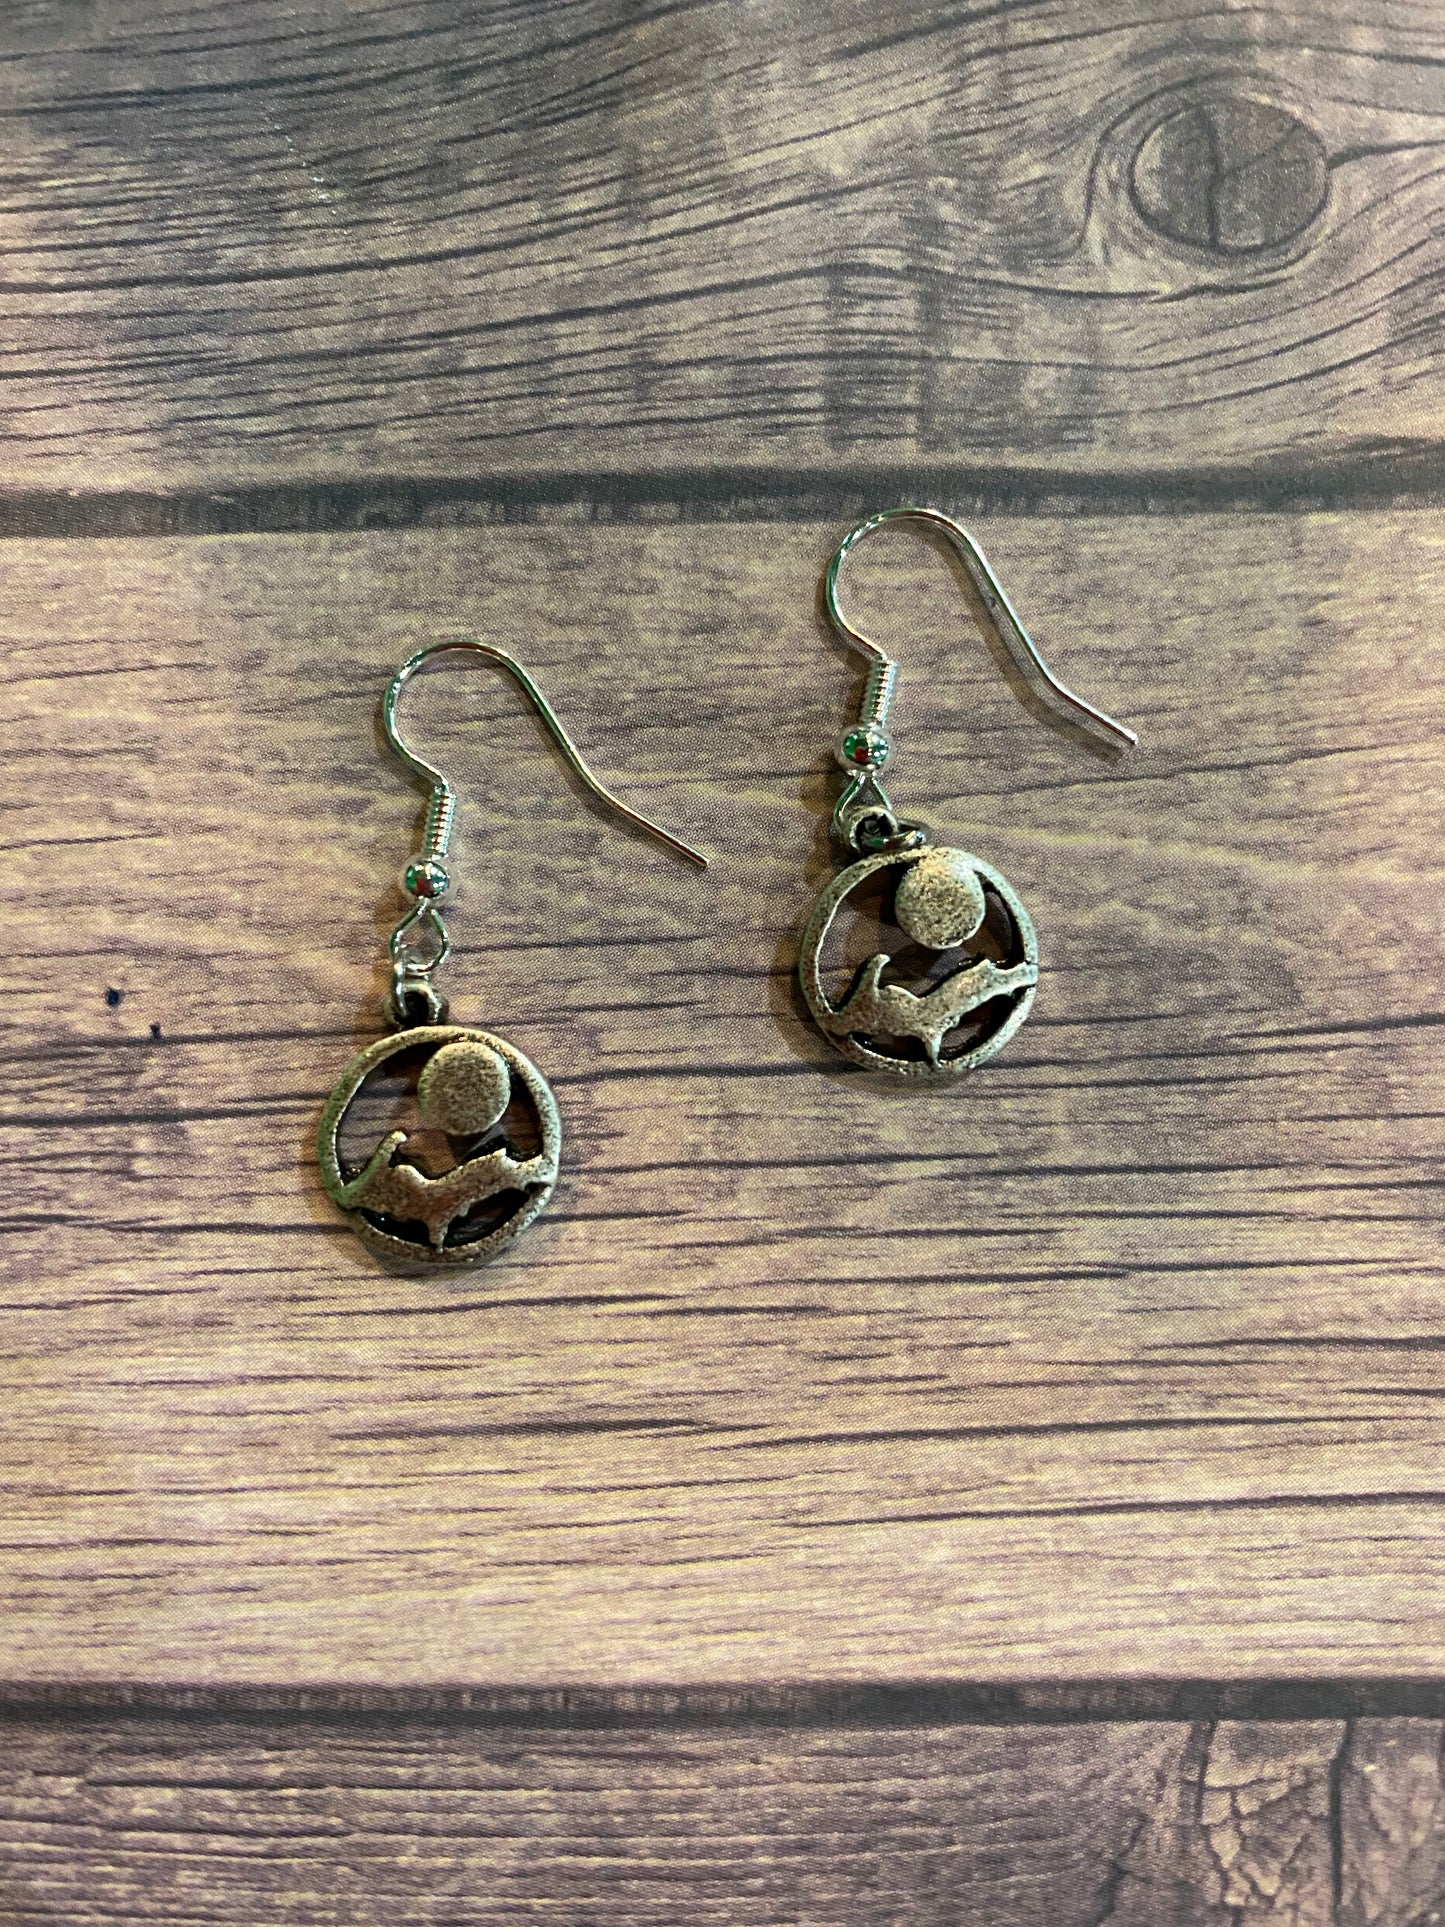 Howl at the Moon Earrings